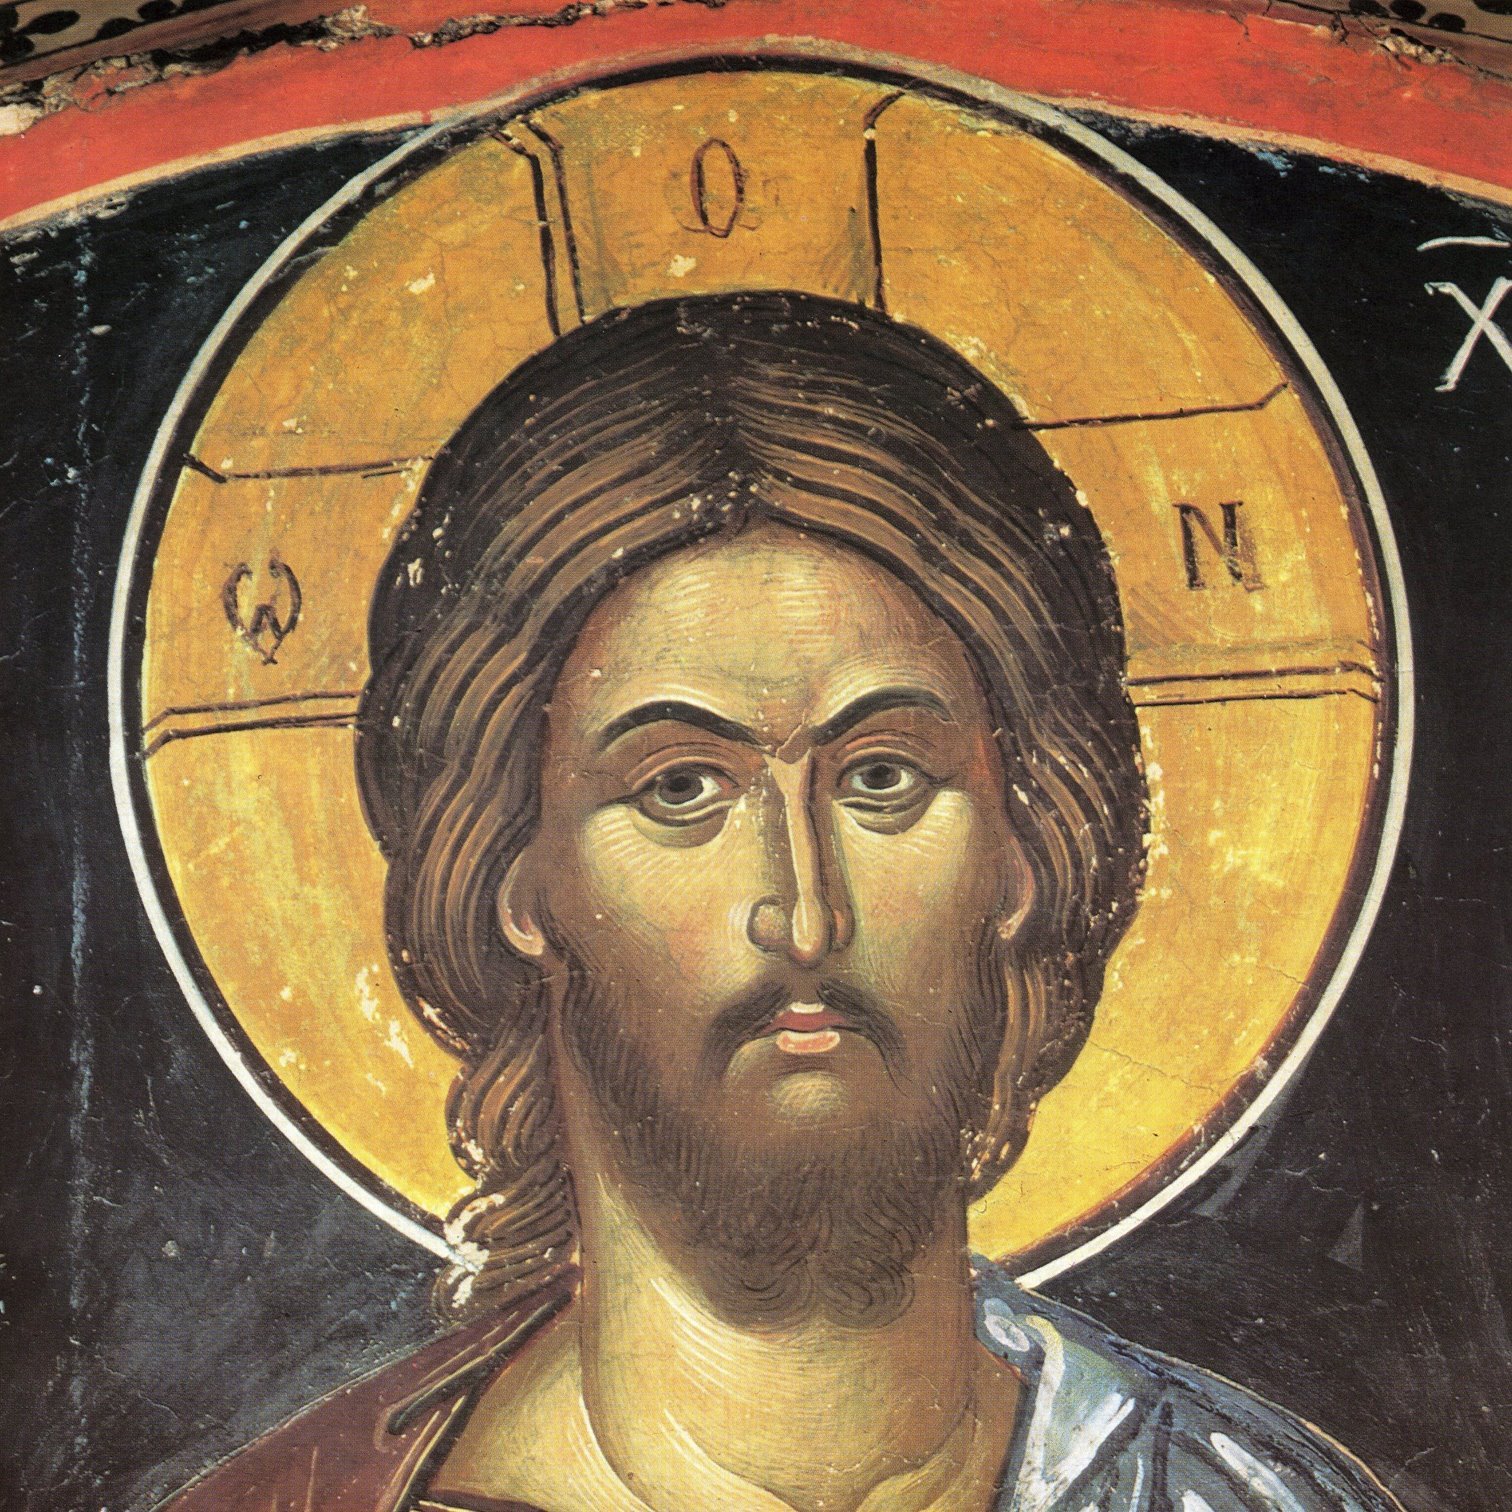 This page is for showing some of the beauty of the Byzantine Art